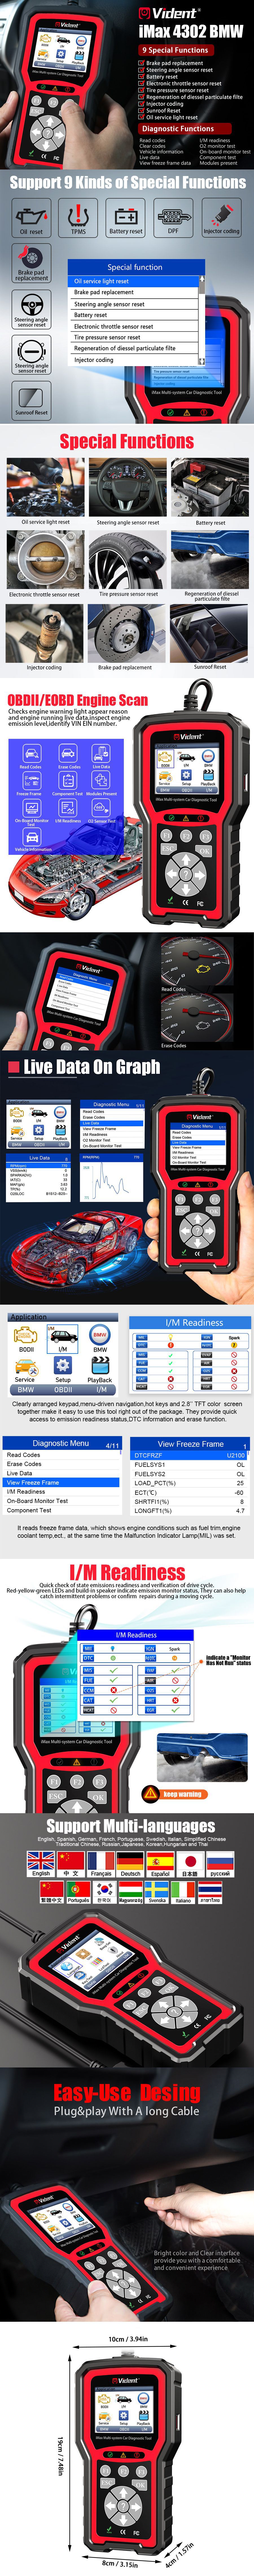 VIDENT iMax4302 BMW Full System Diagnose Tool